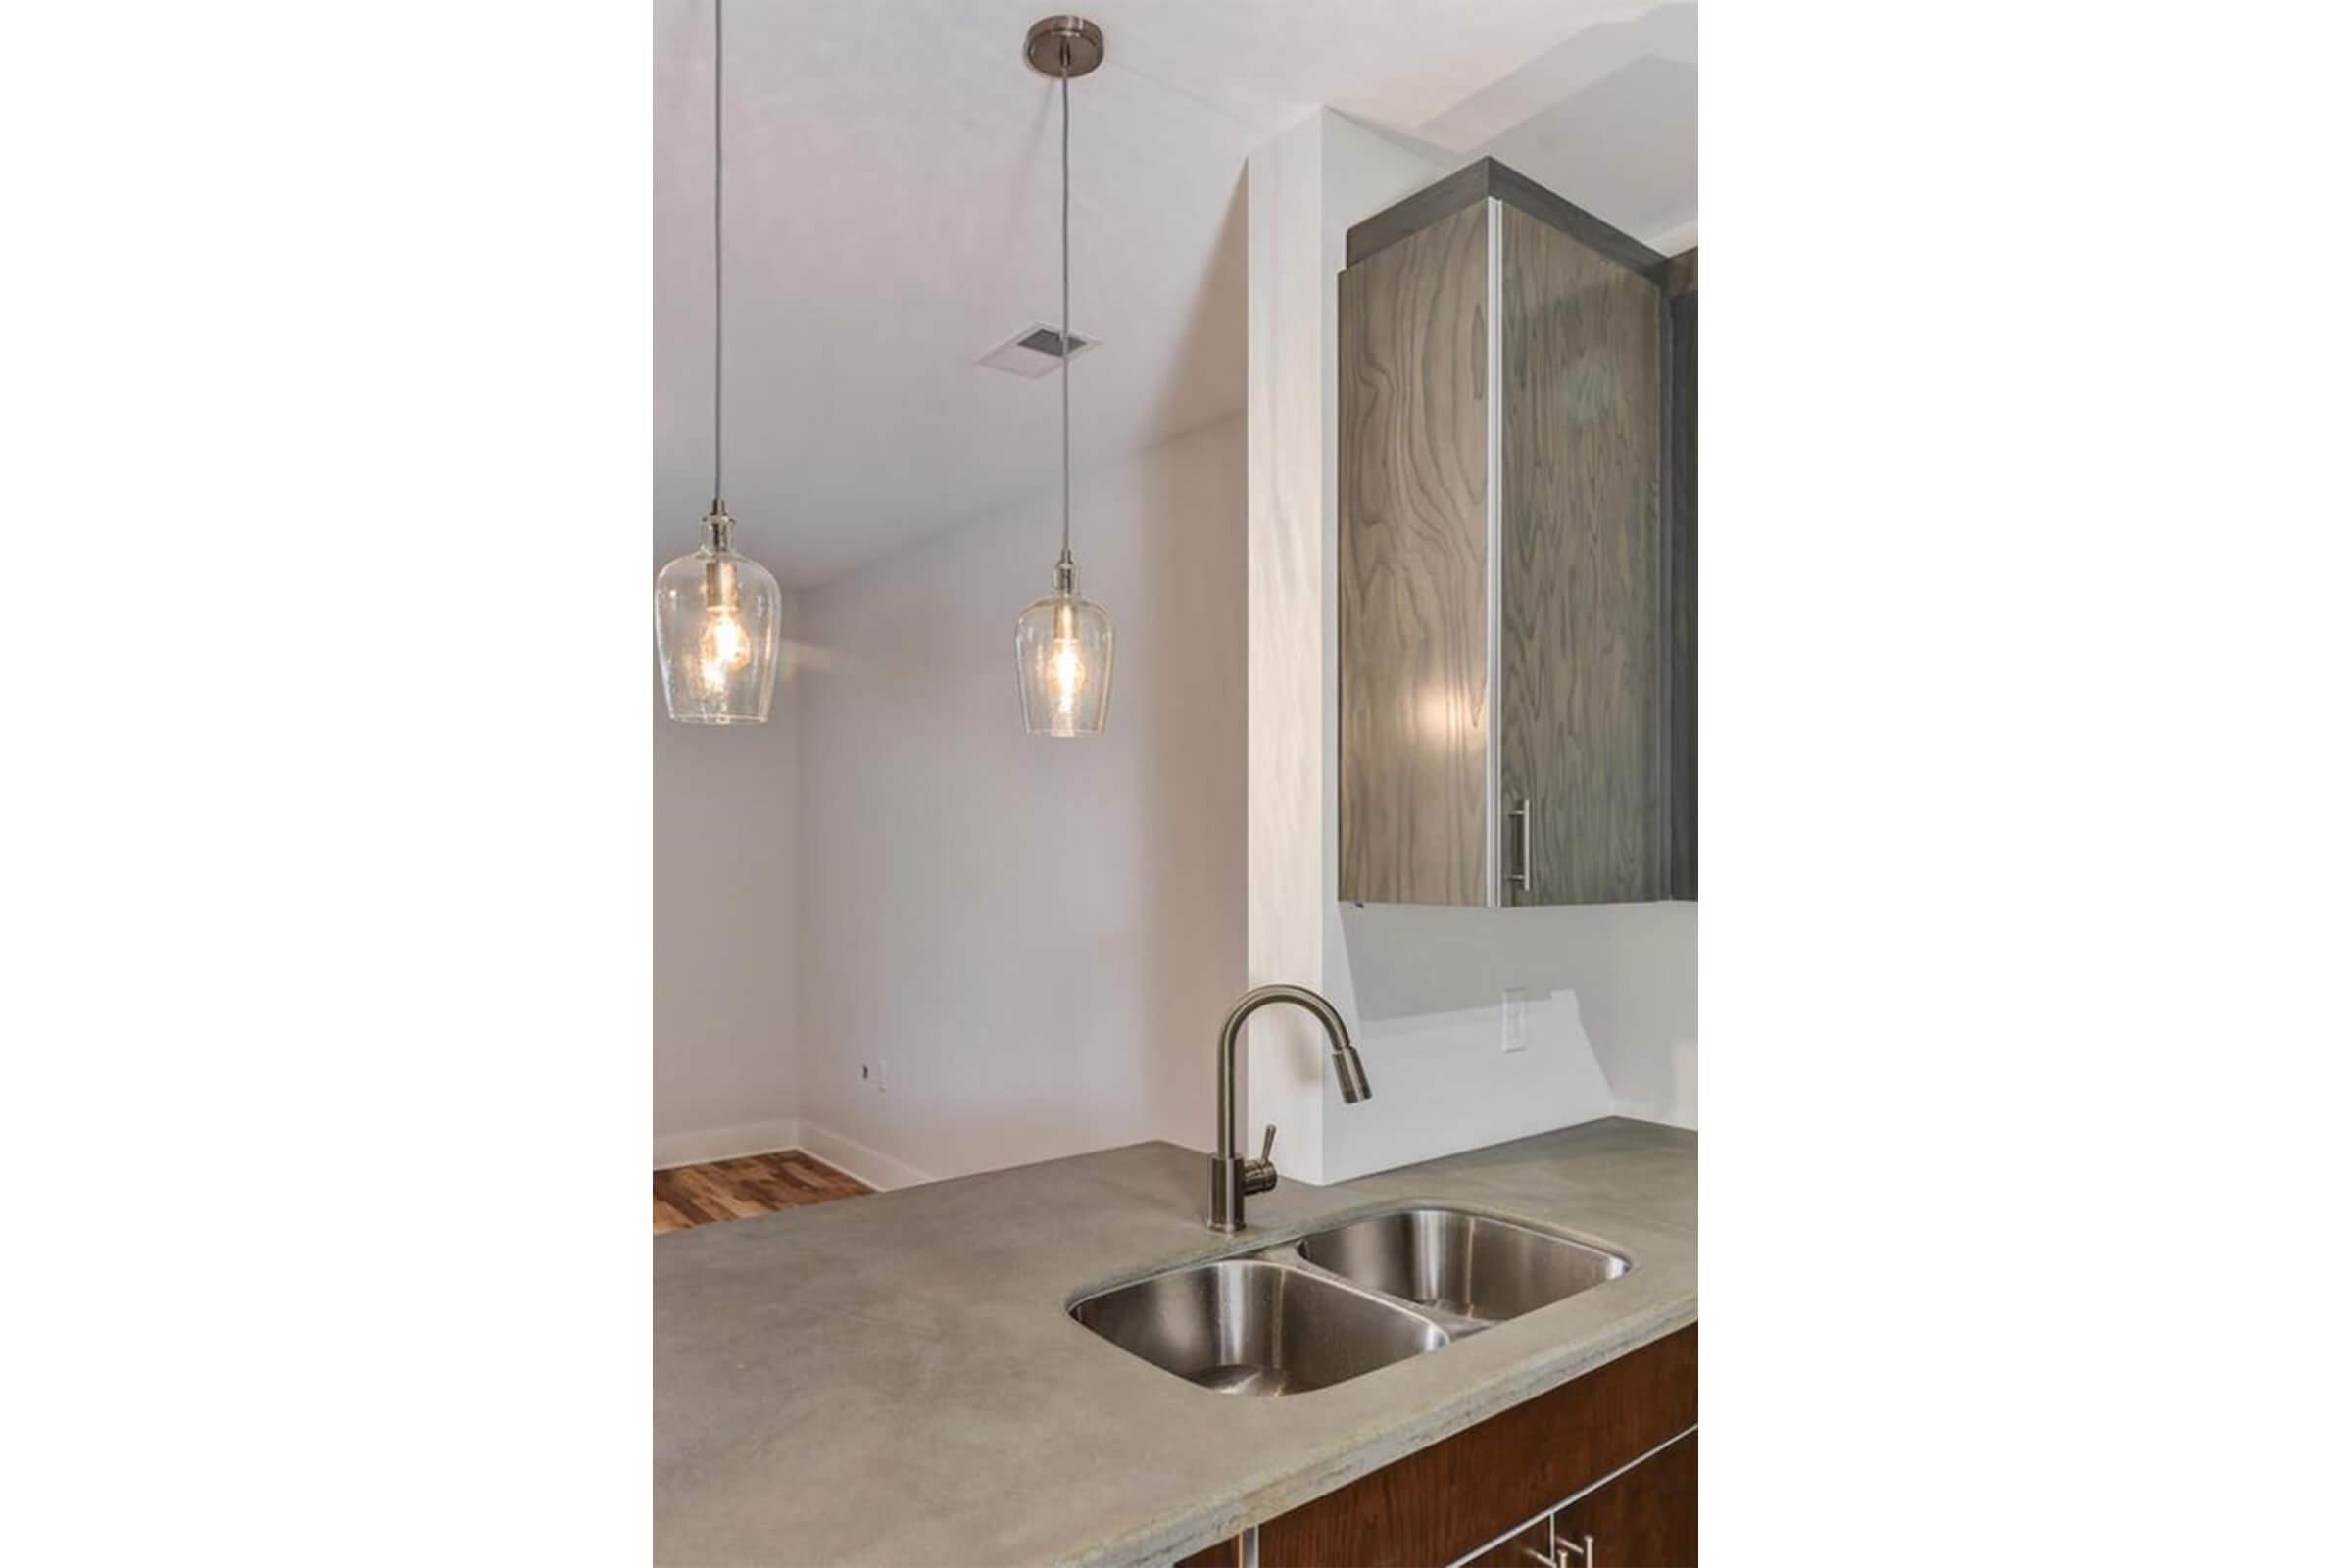 Gooseneck faucets available at The Lofts at South Slope in Asheville, NC.